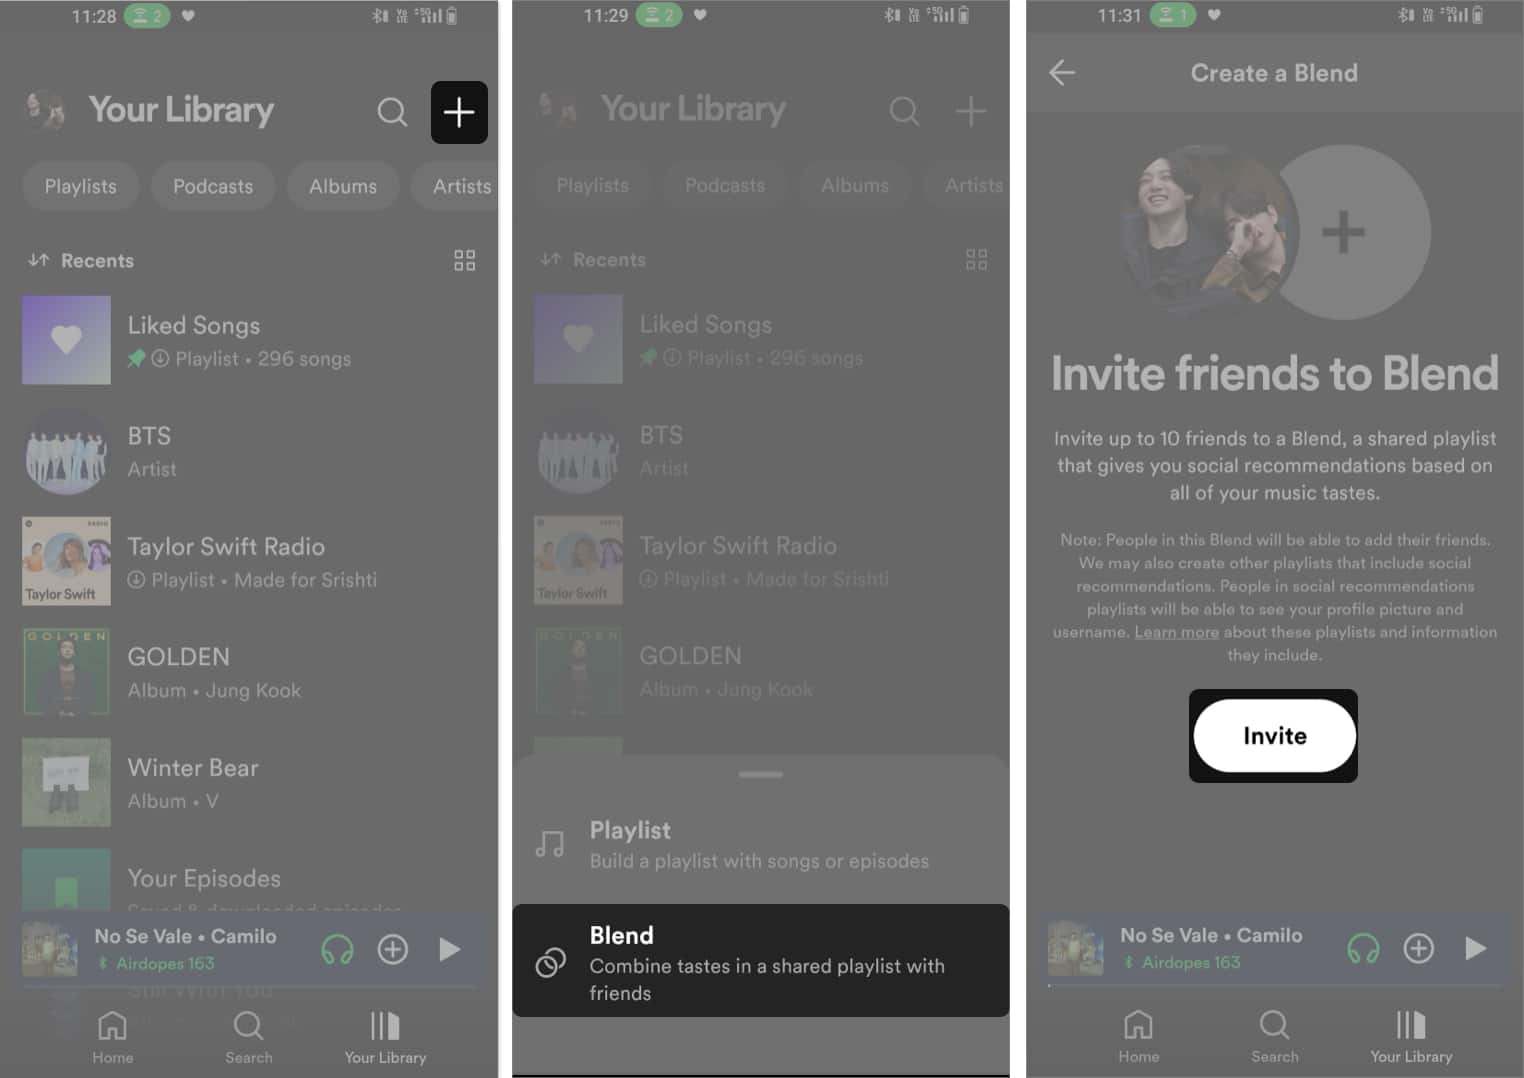 Tap on Plus icon, Choose Blend, and Pick Invite to invite friends to Blend